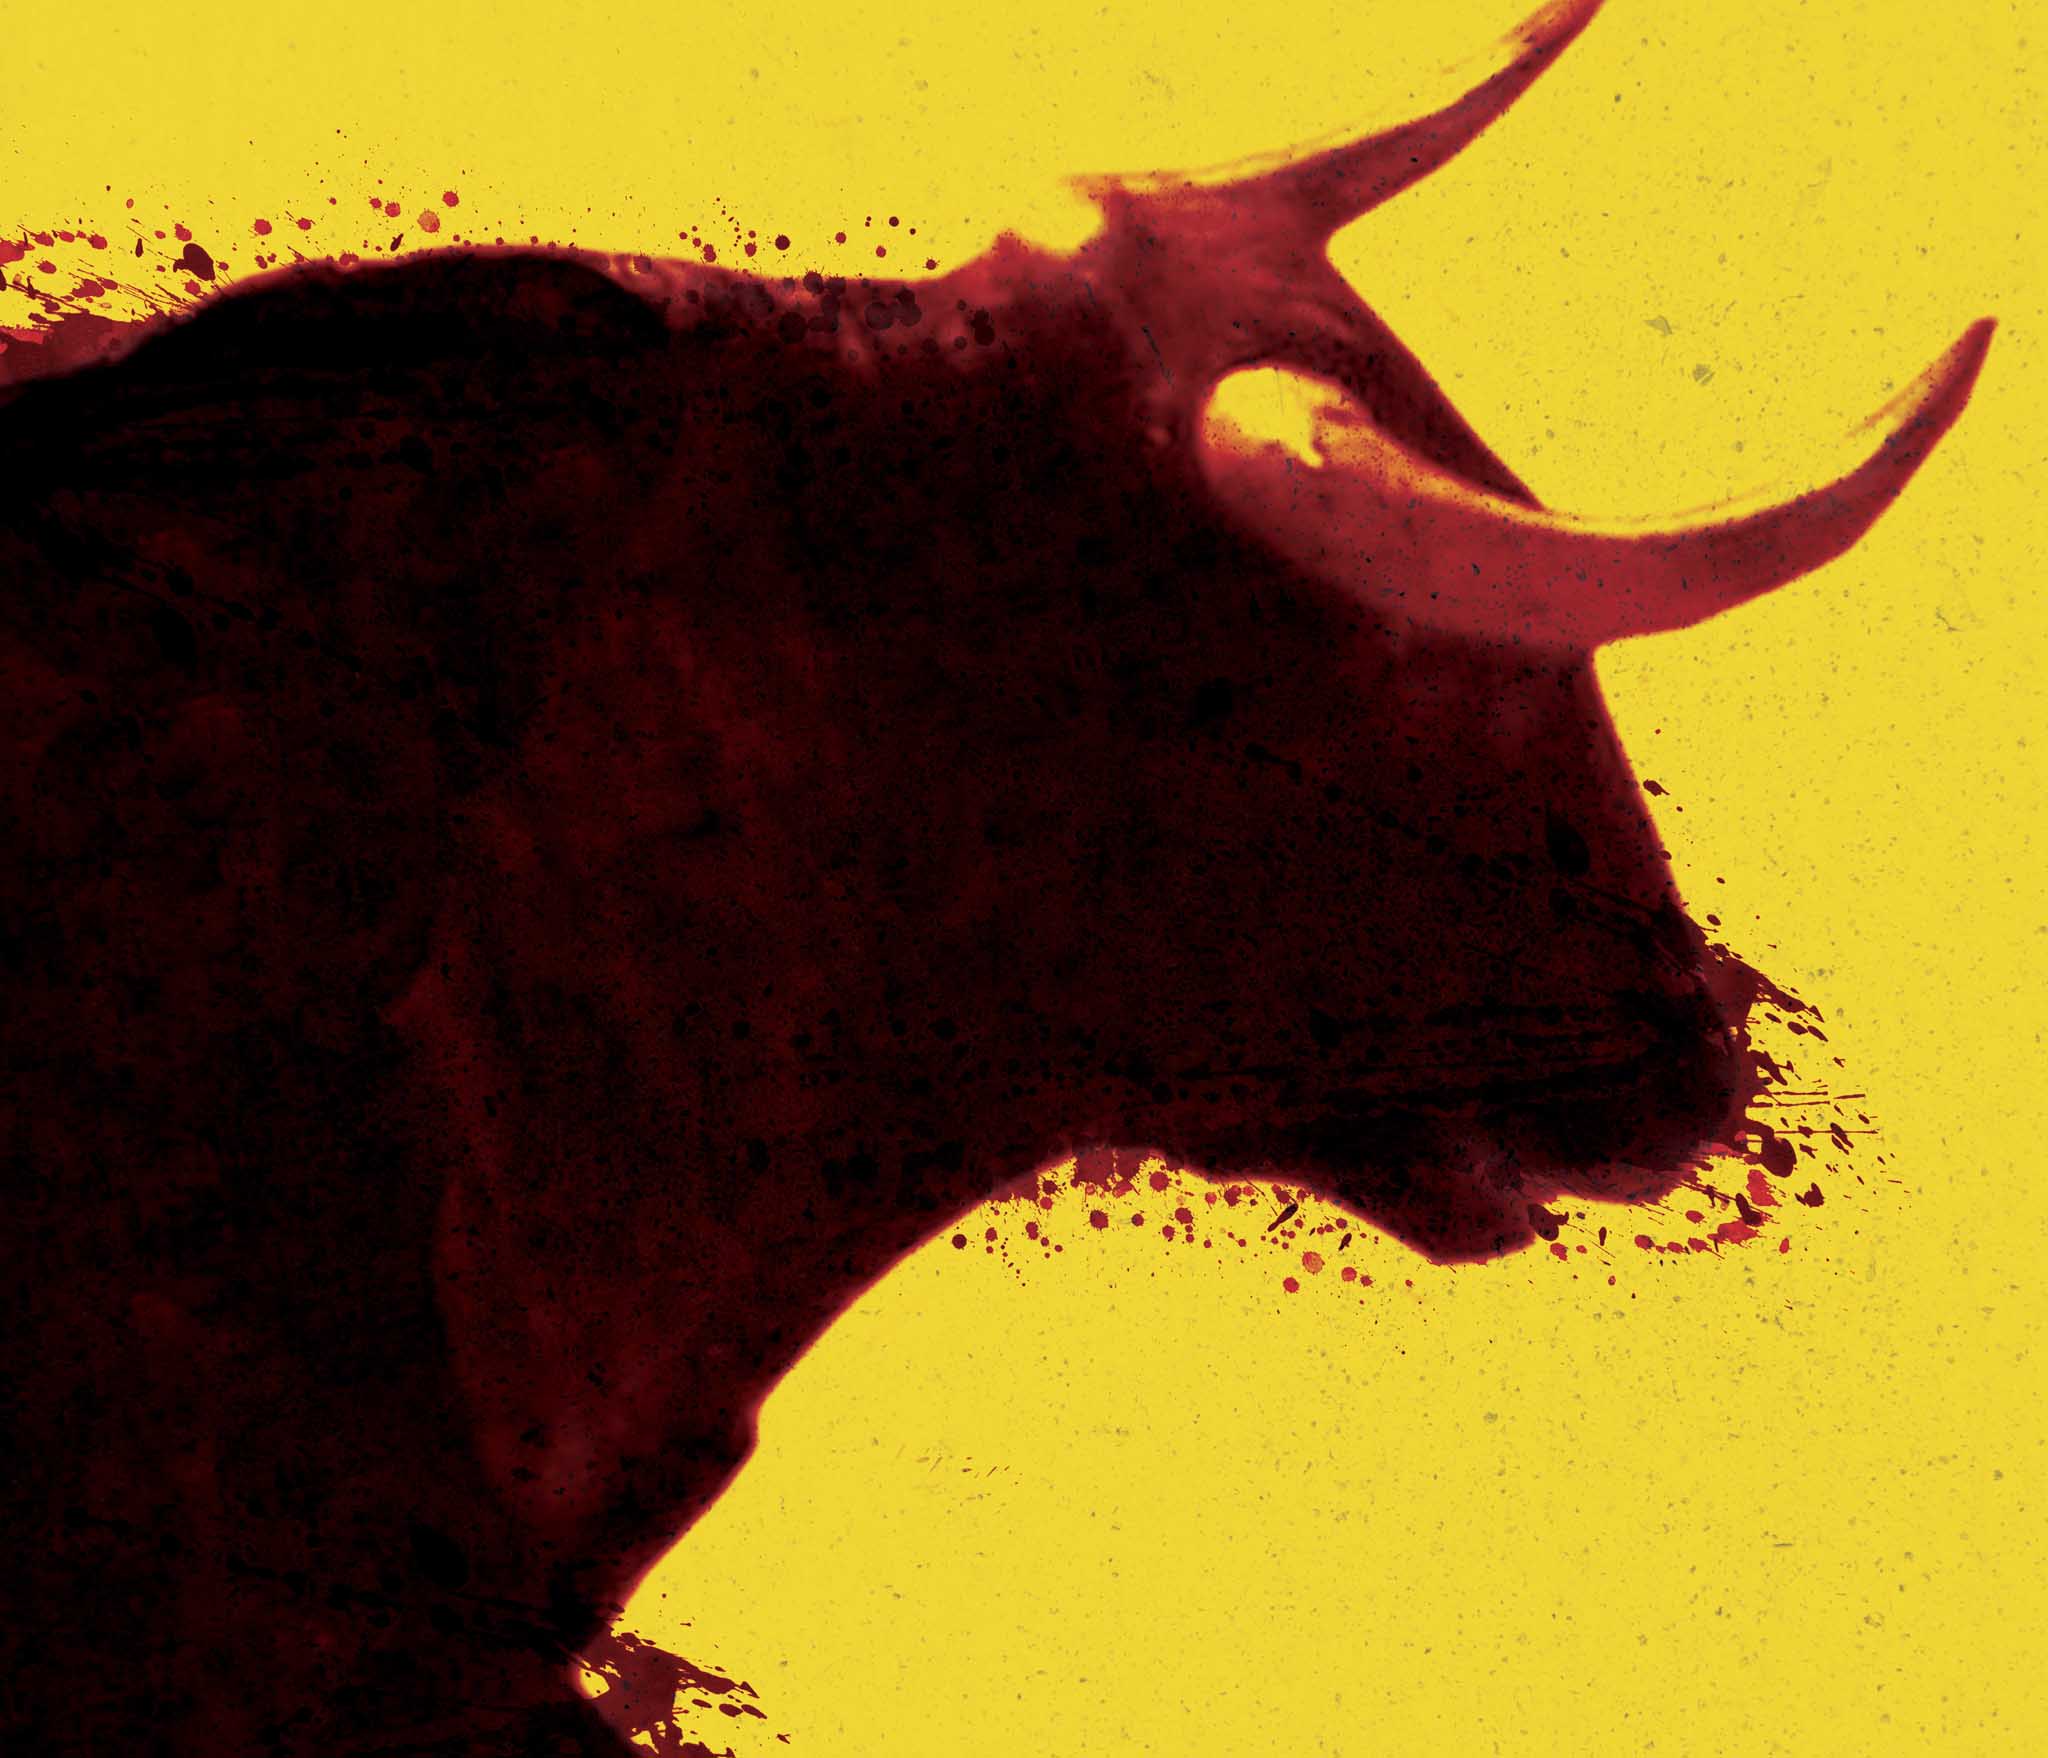 Mike Bartlett's Bull at the Young Vic